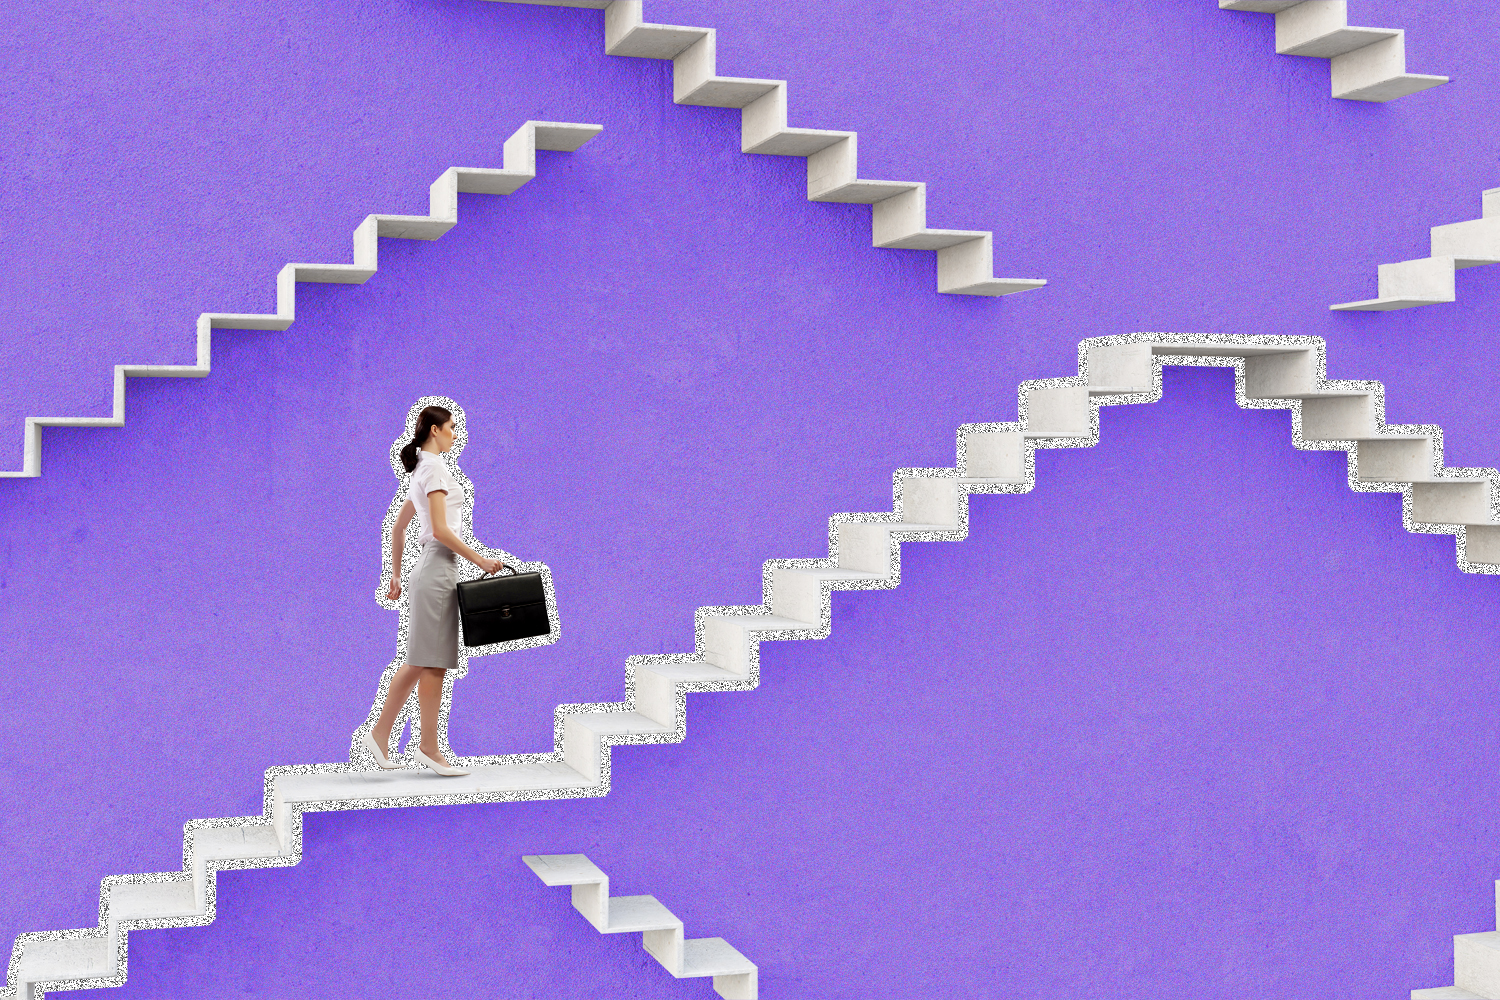 A woman holding a briefcase walking up a flight of stairs against a purple background